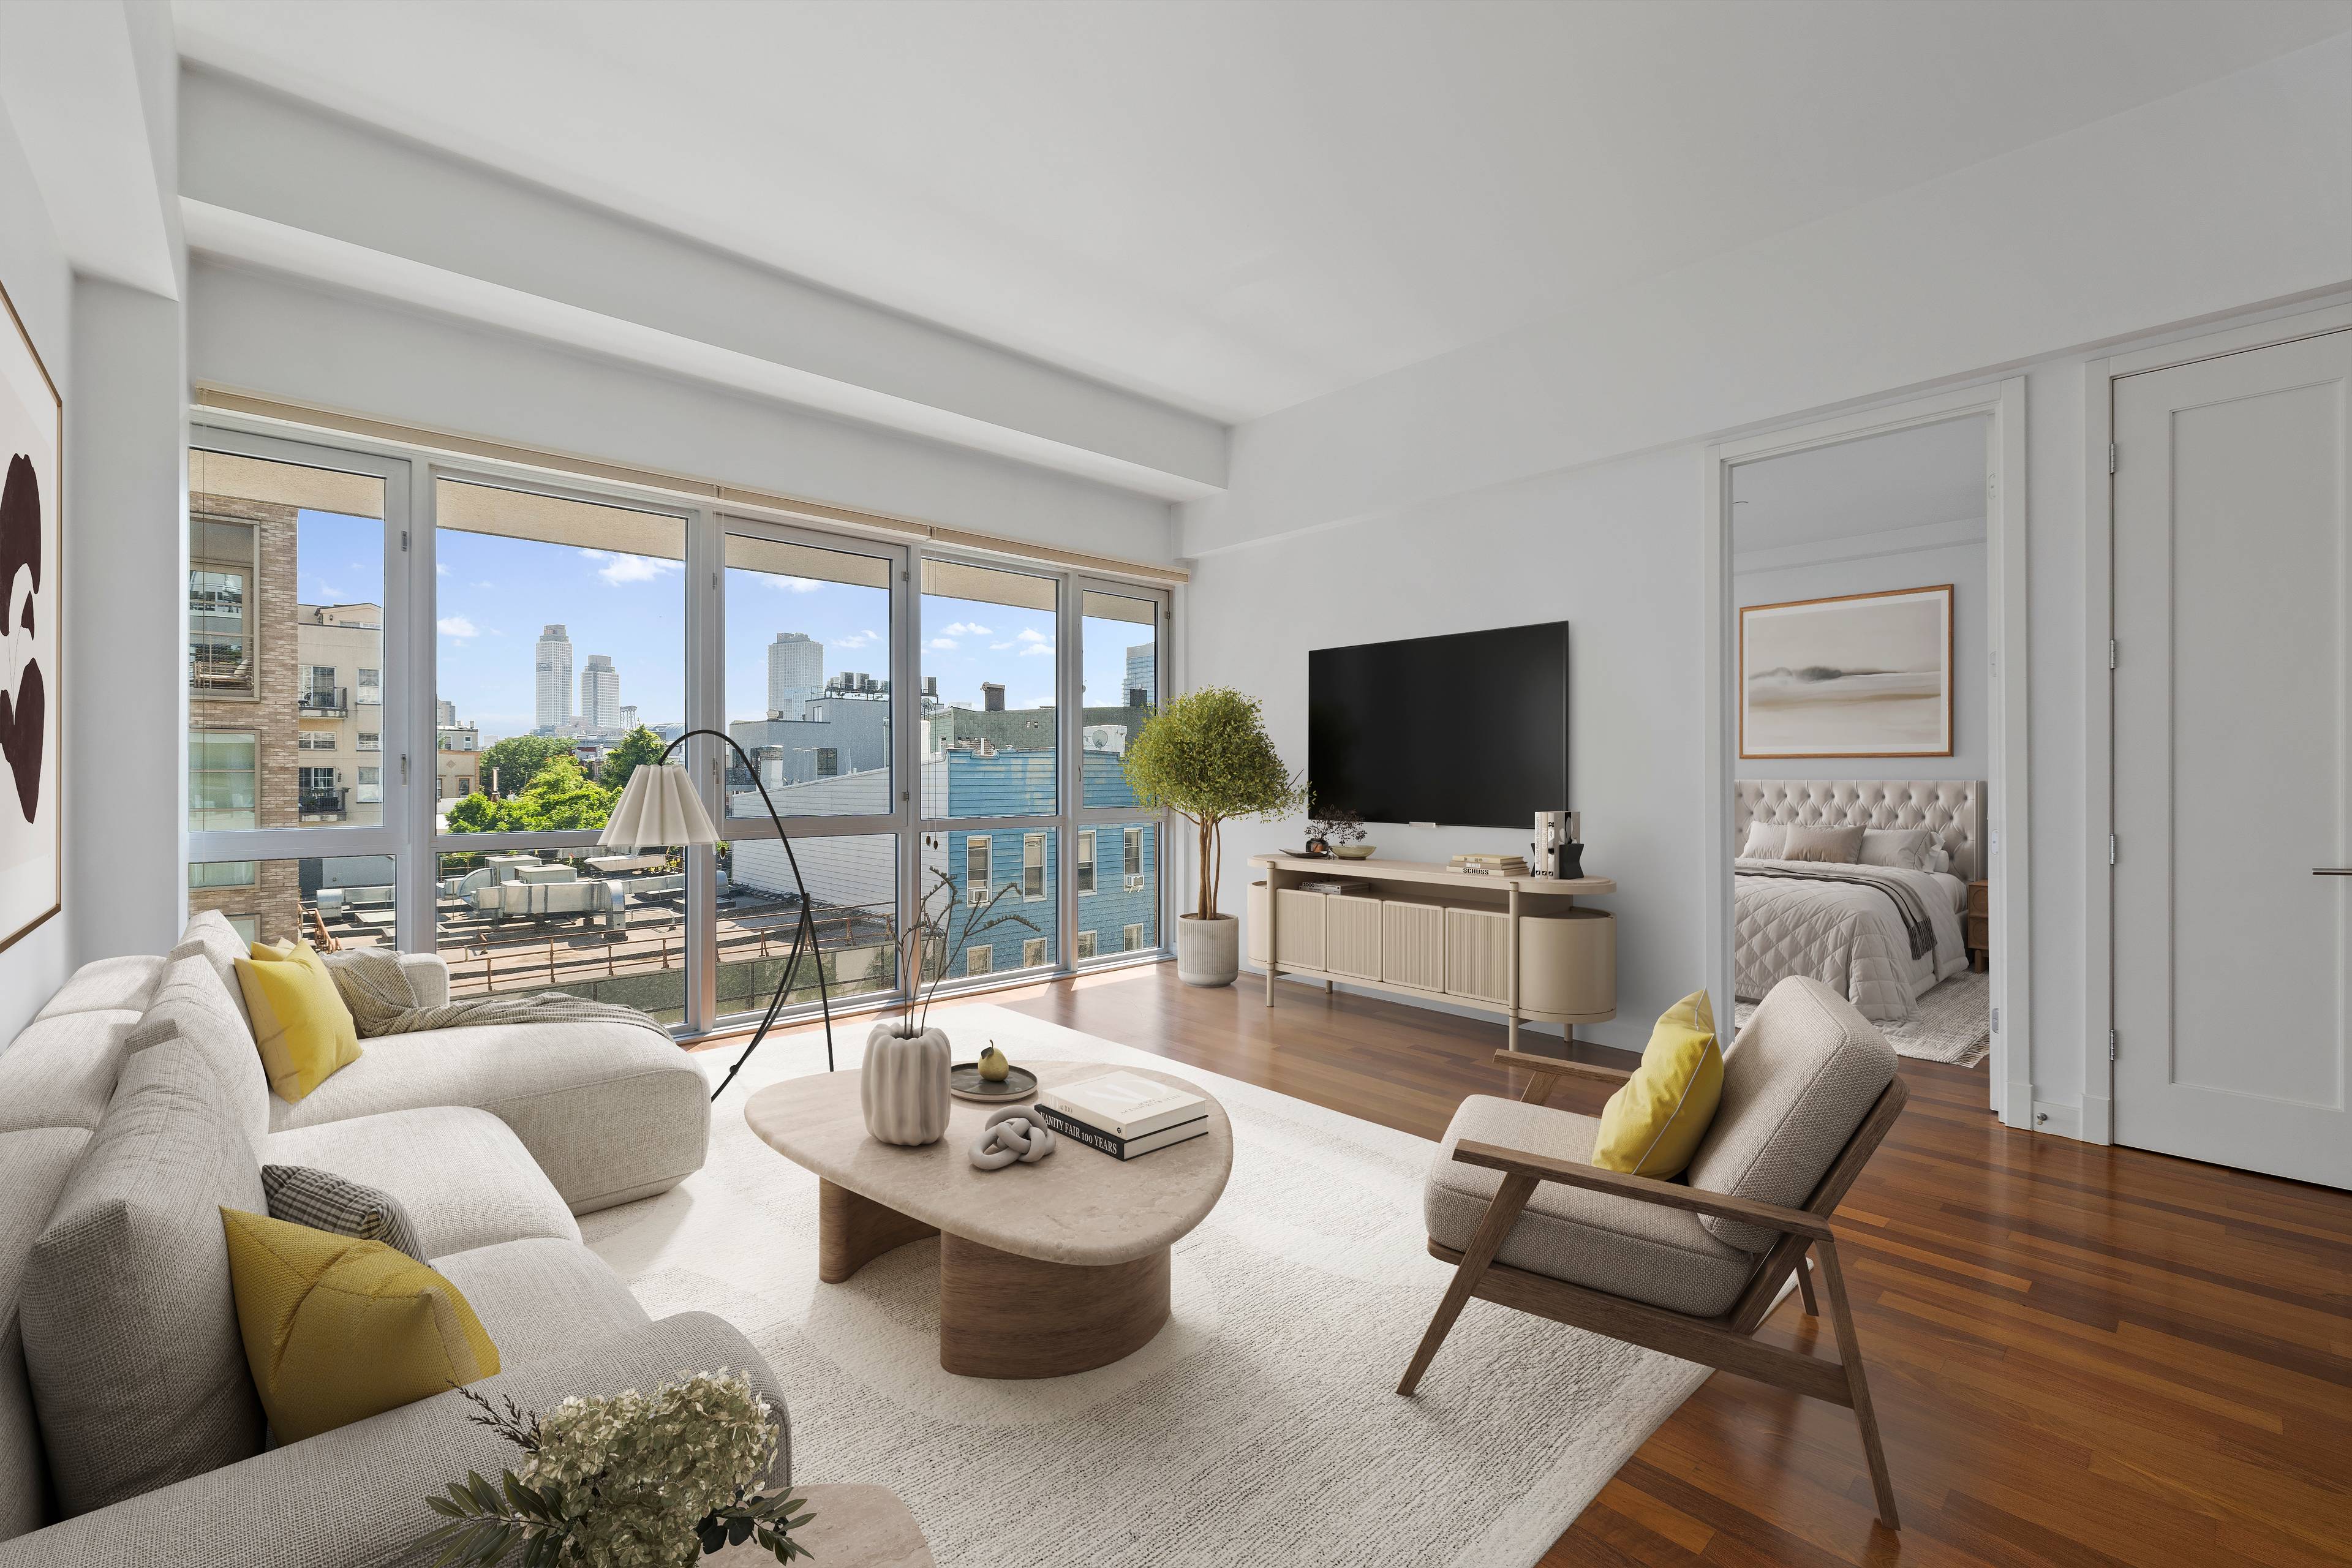 PRIME WILLIAMSBURG 1-BED WITH HOME OFFICE AREA + PRIVATE CABANA + PARKING OPTION